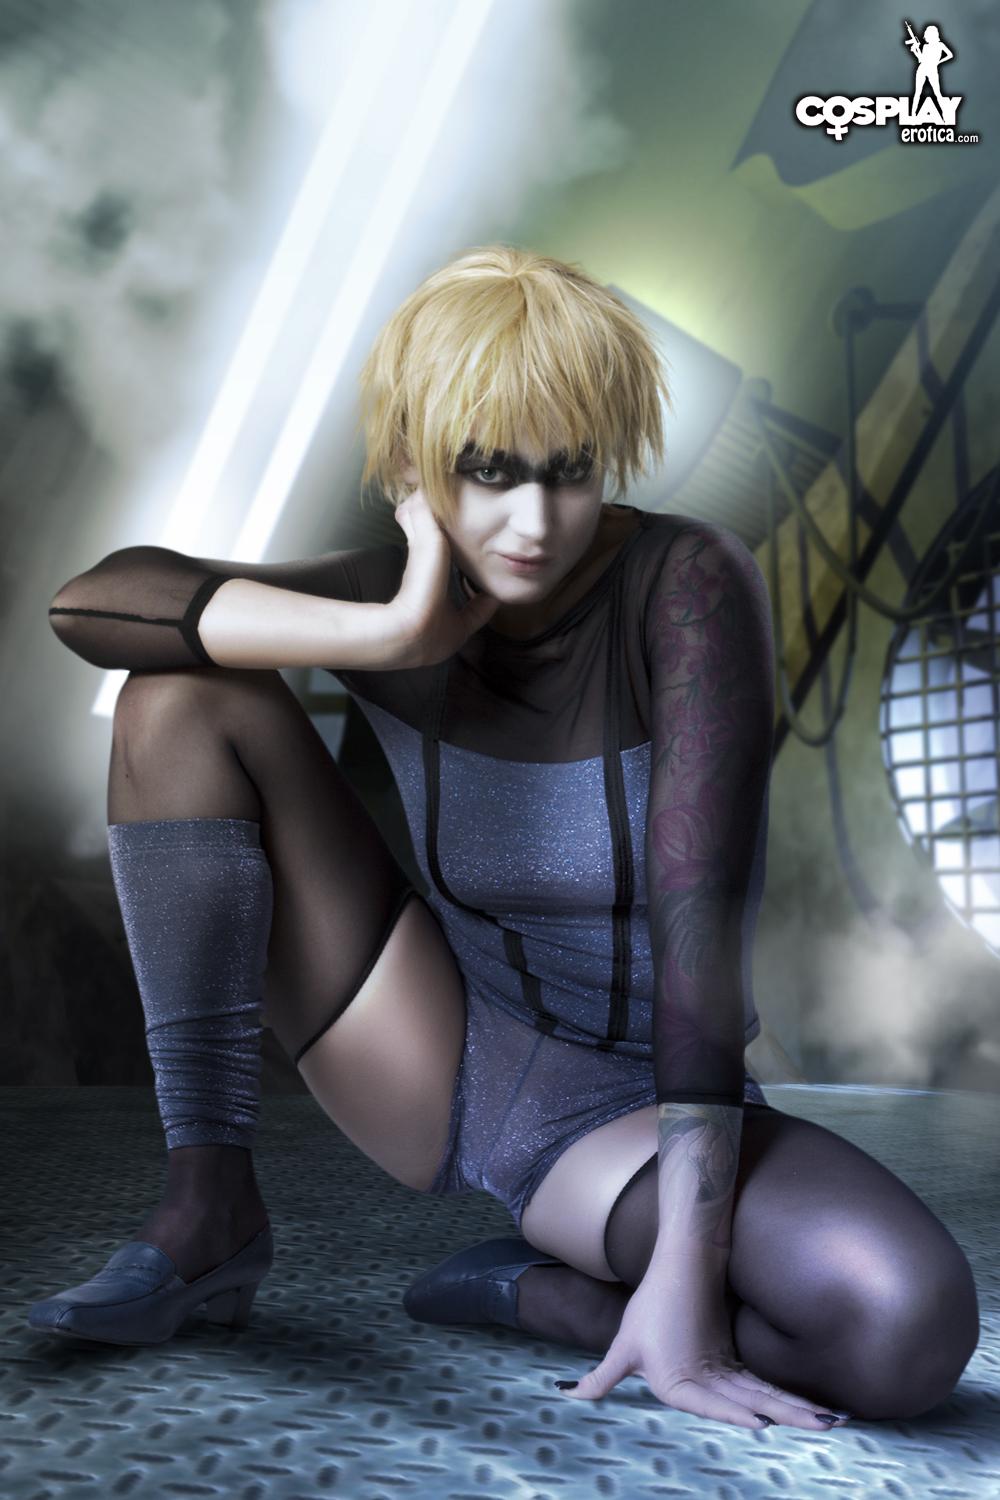 Cosplayer Kayla dresses up as Pris from Blade Runner #58176119